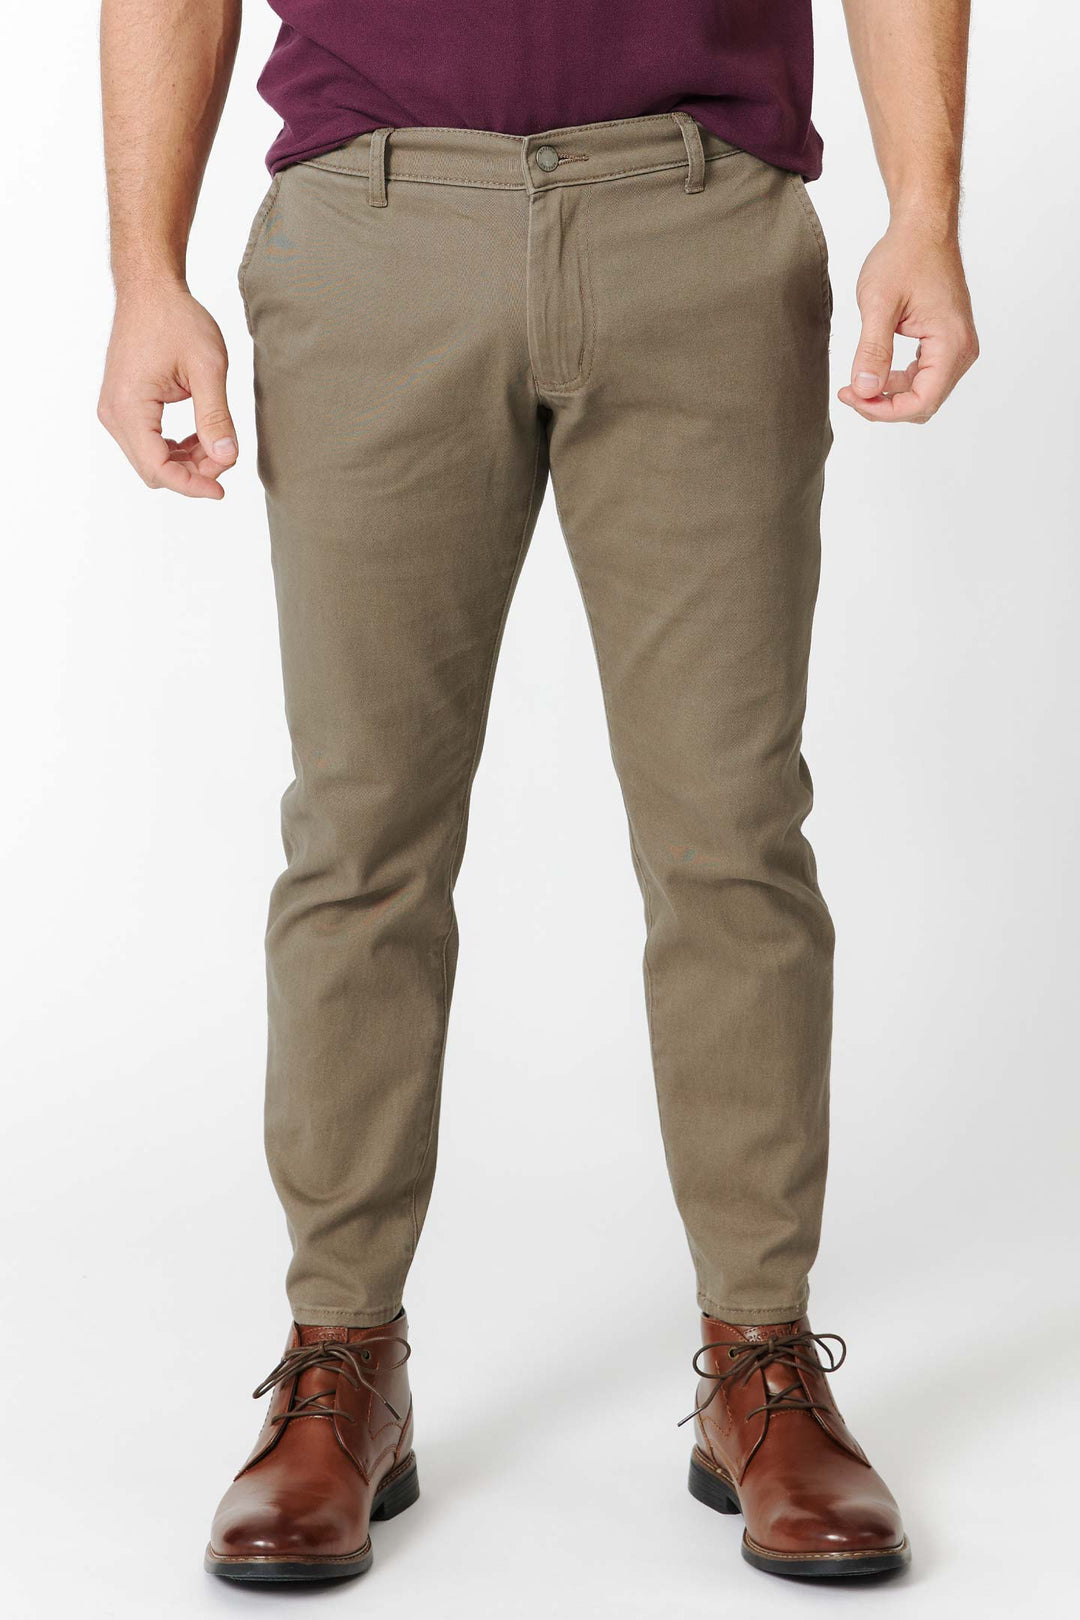 Buy Driftwood Lightweight Stretch Chinos for Short Men | Ash & Erie   Chino Pants